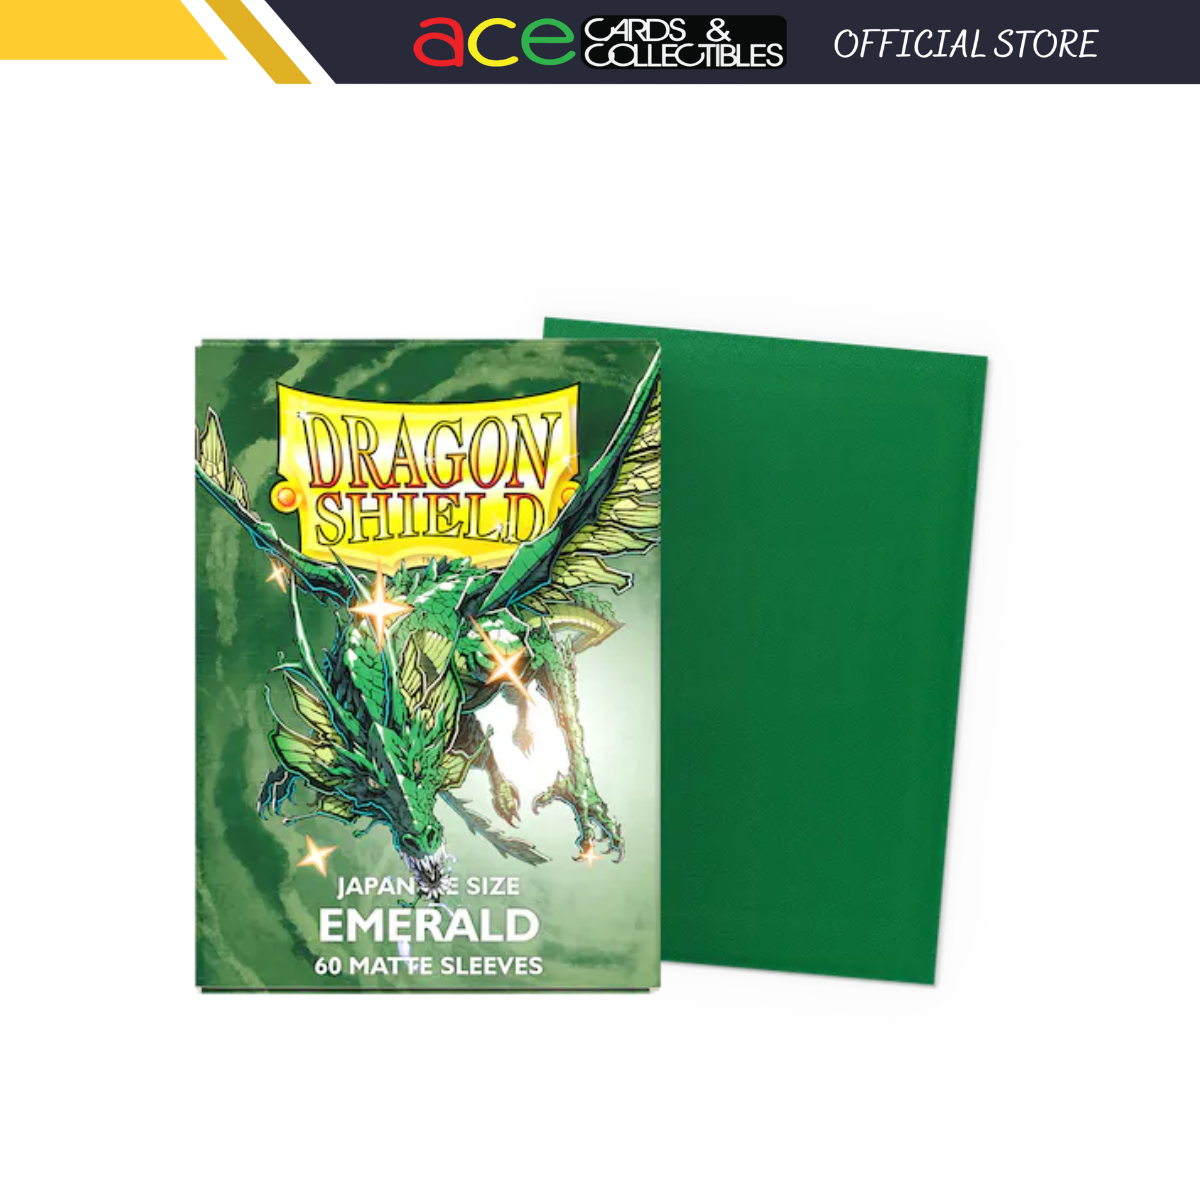 Dragon Shield Sleeve DS60J Matte Japanese size - Emerald-Dragon Shield-Ace Cards &amp; Collectibles